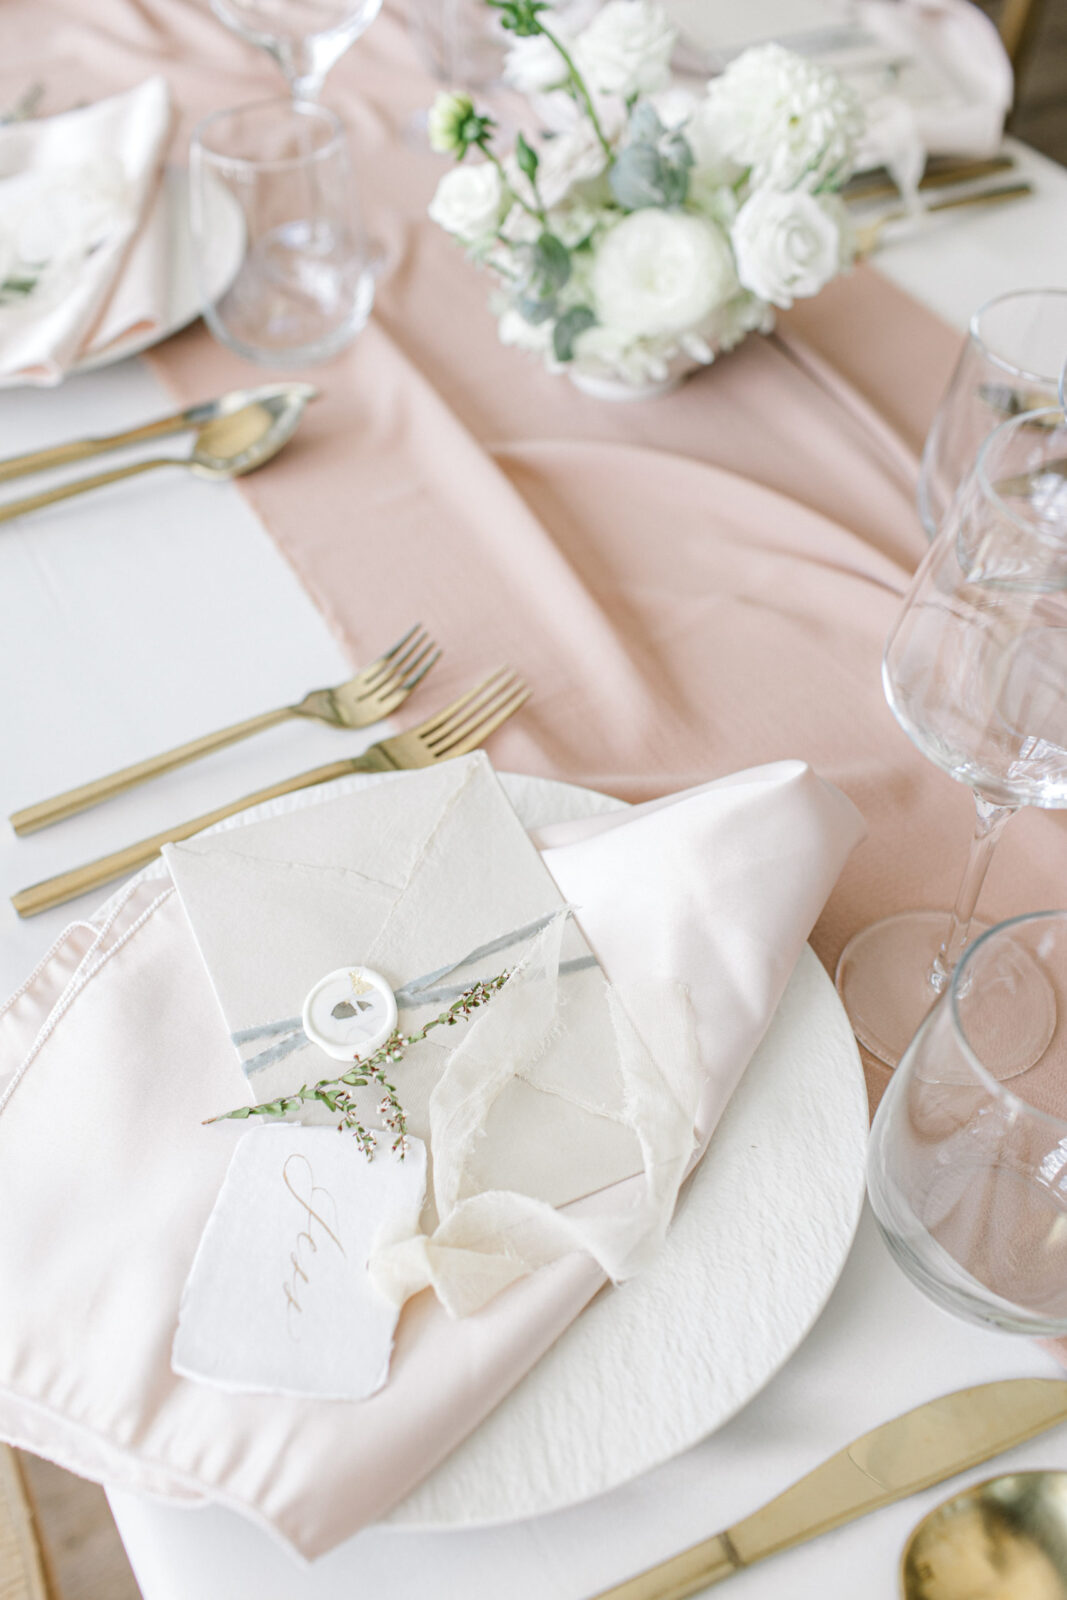 Place setting with gold cutlery, textured ceramic plate, handmade paper envelope, place card with ribbon and calligraphy, beautiful modern yet classic wedding table inspiration